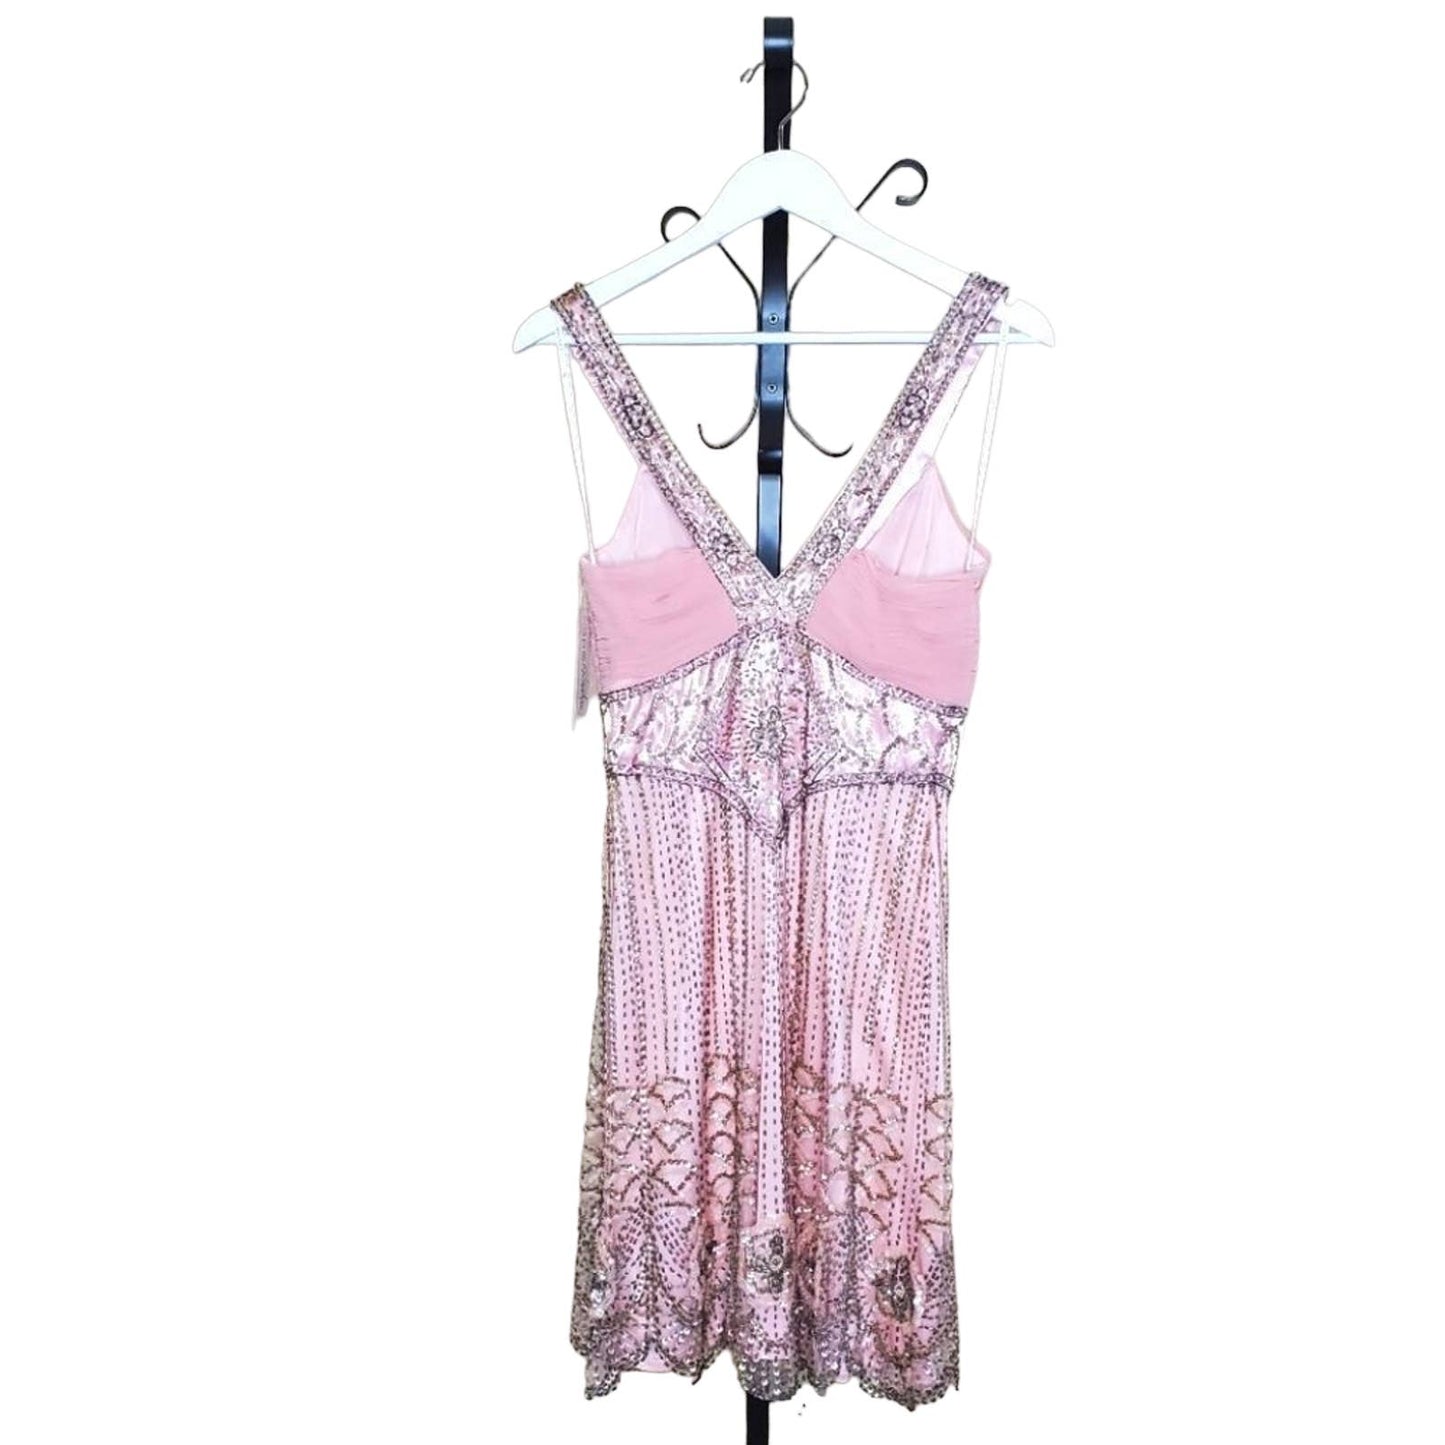 NEW Sue Wong Nocturne Beaded Embroidered Dress, Pink, Size 2